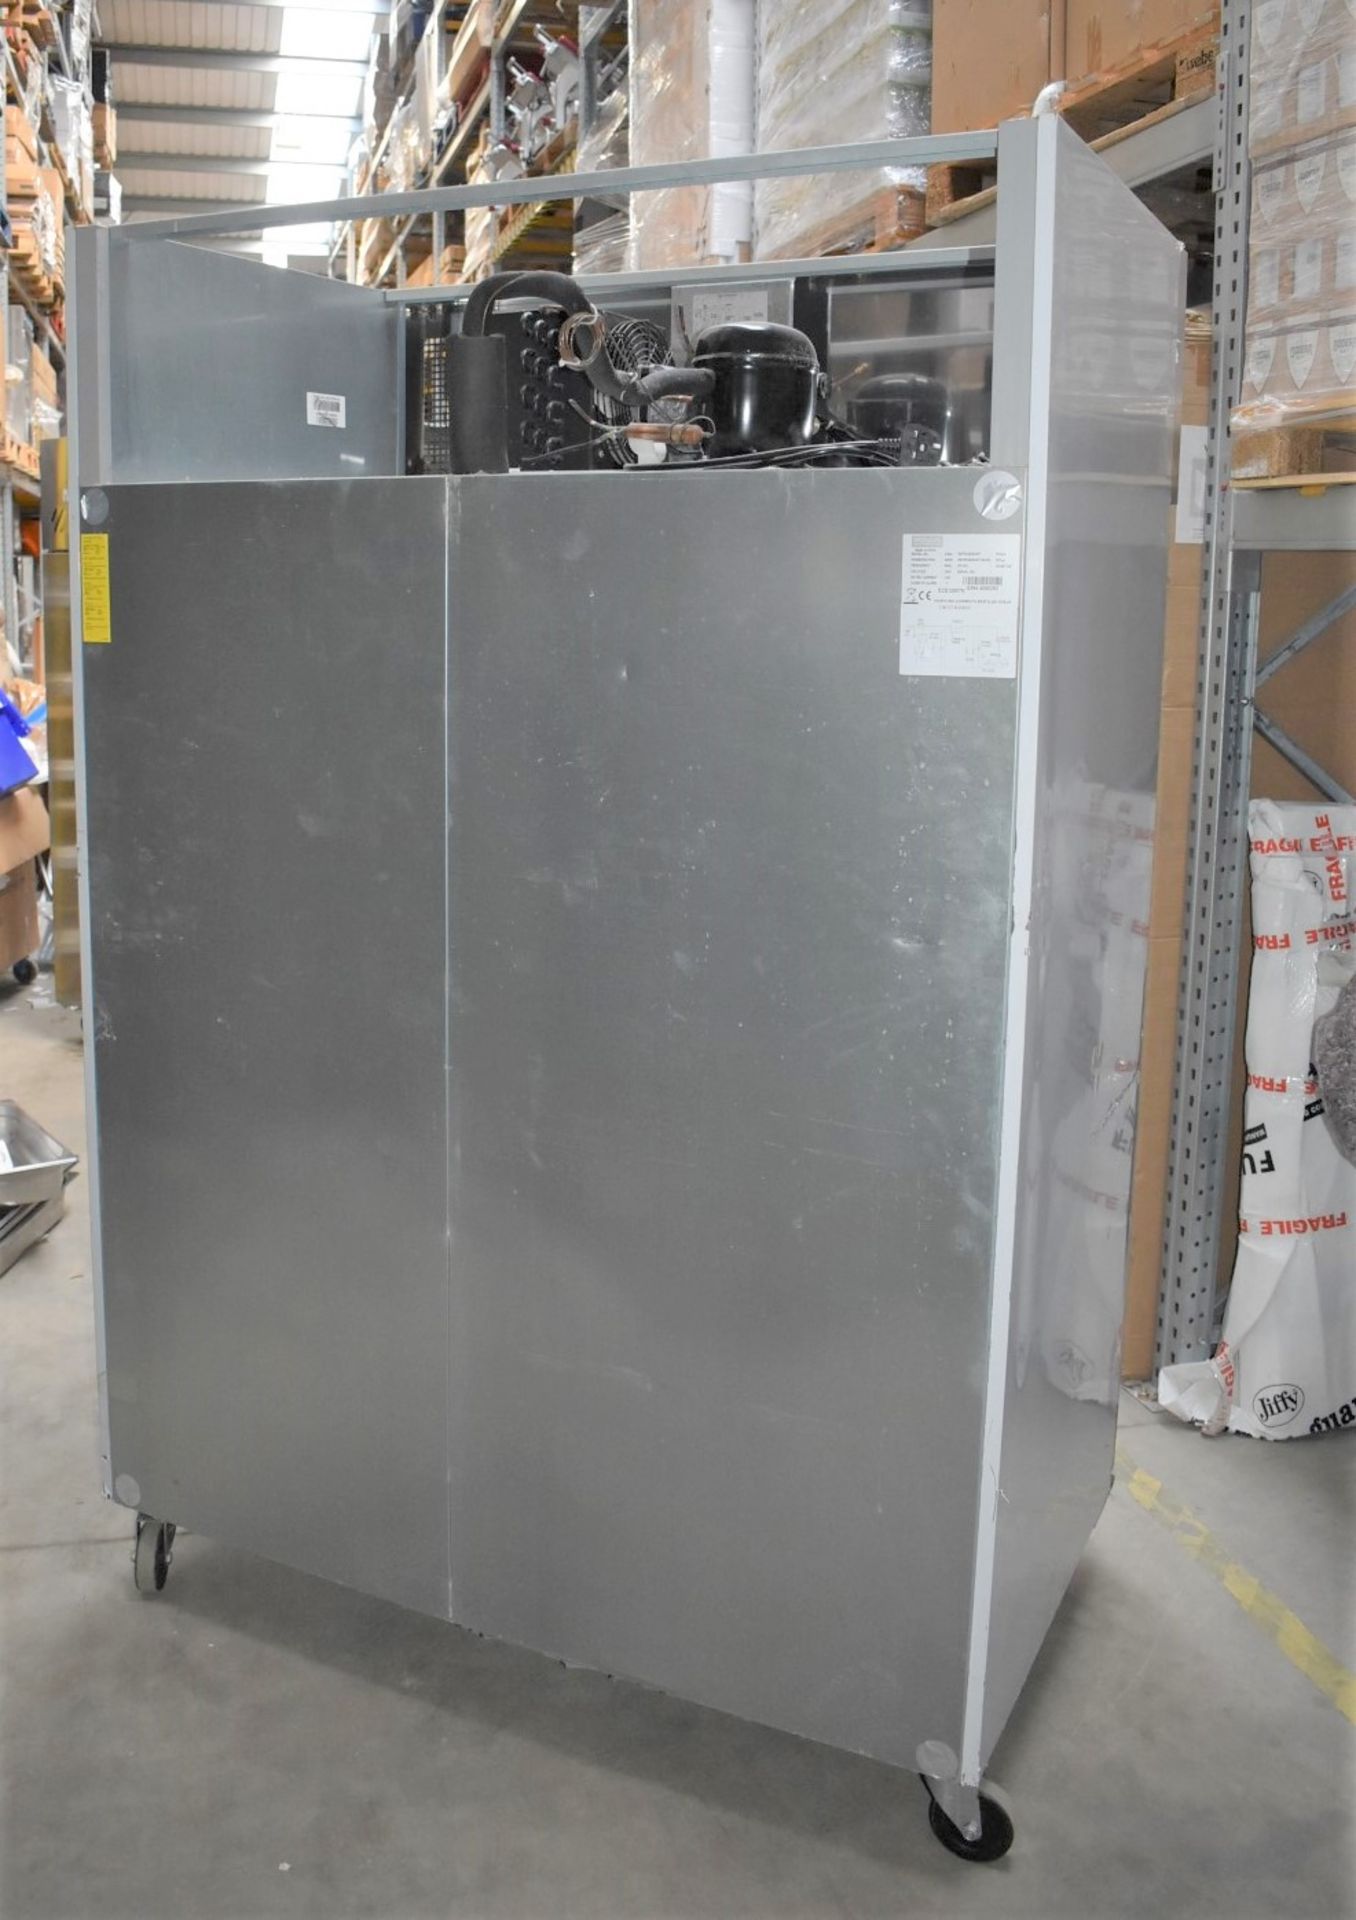 1 x Polar G Series Upright Double Door Refrigerator - Model G594 - Complete With Internal - Image 10 of 18